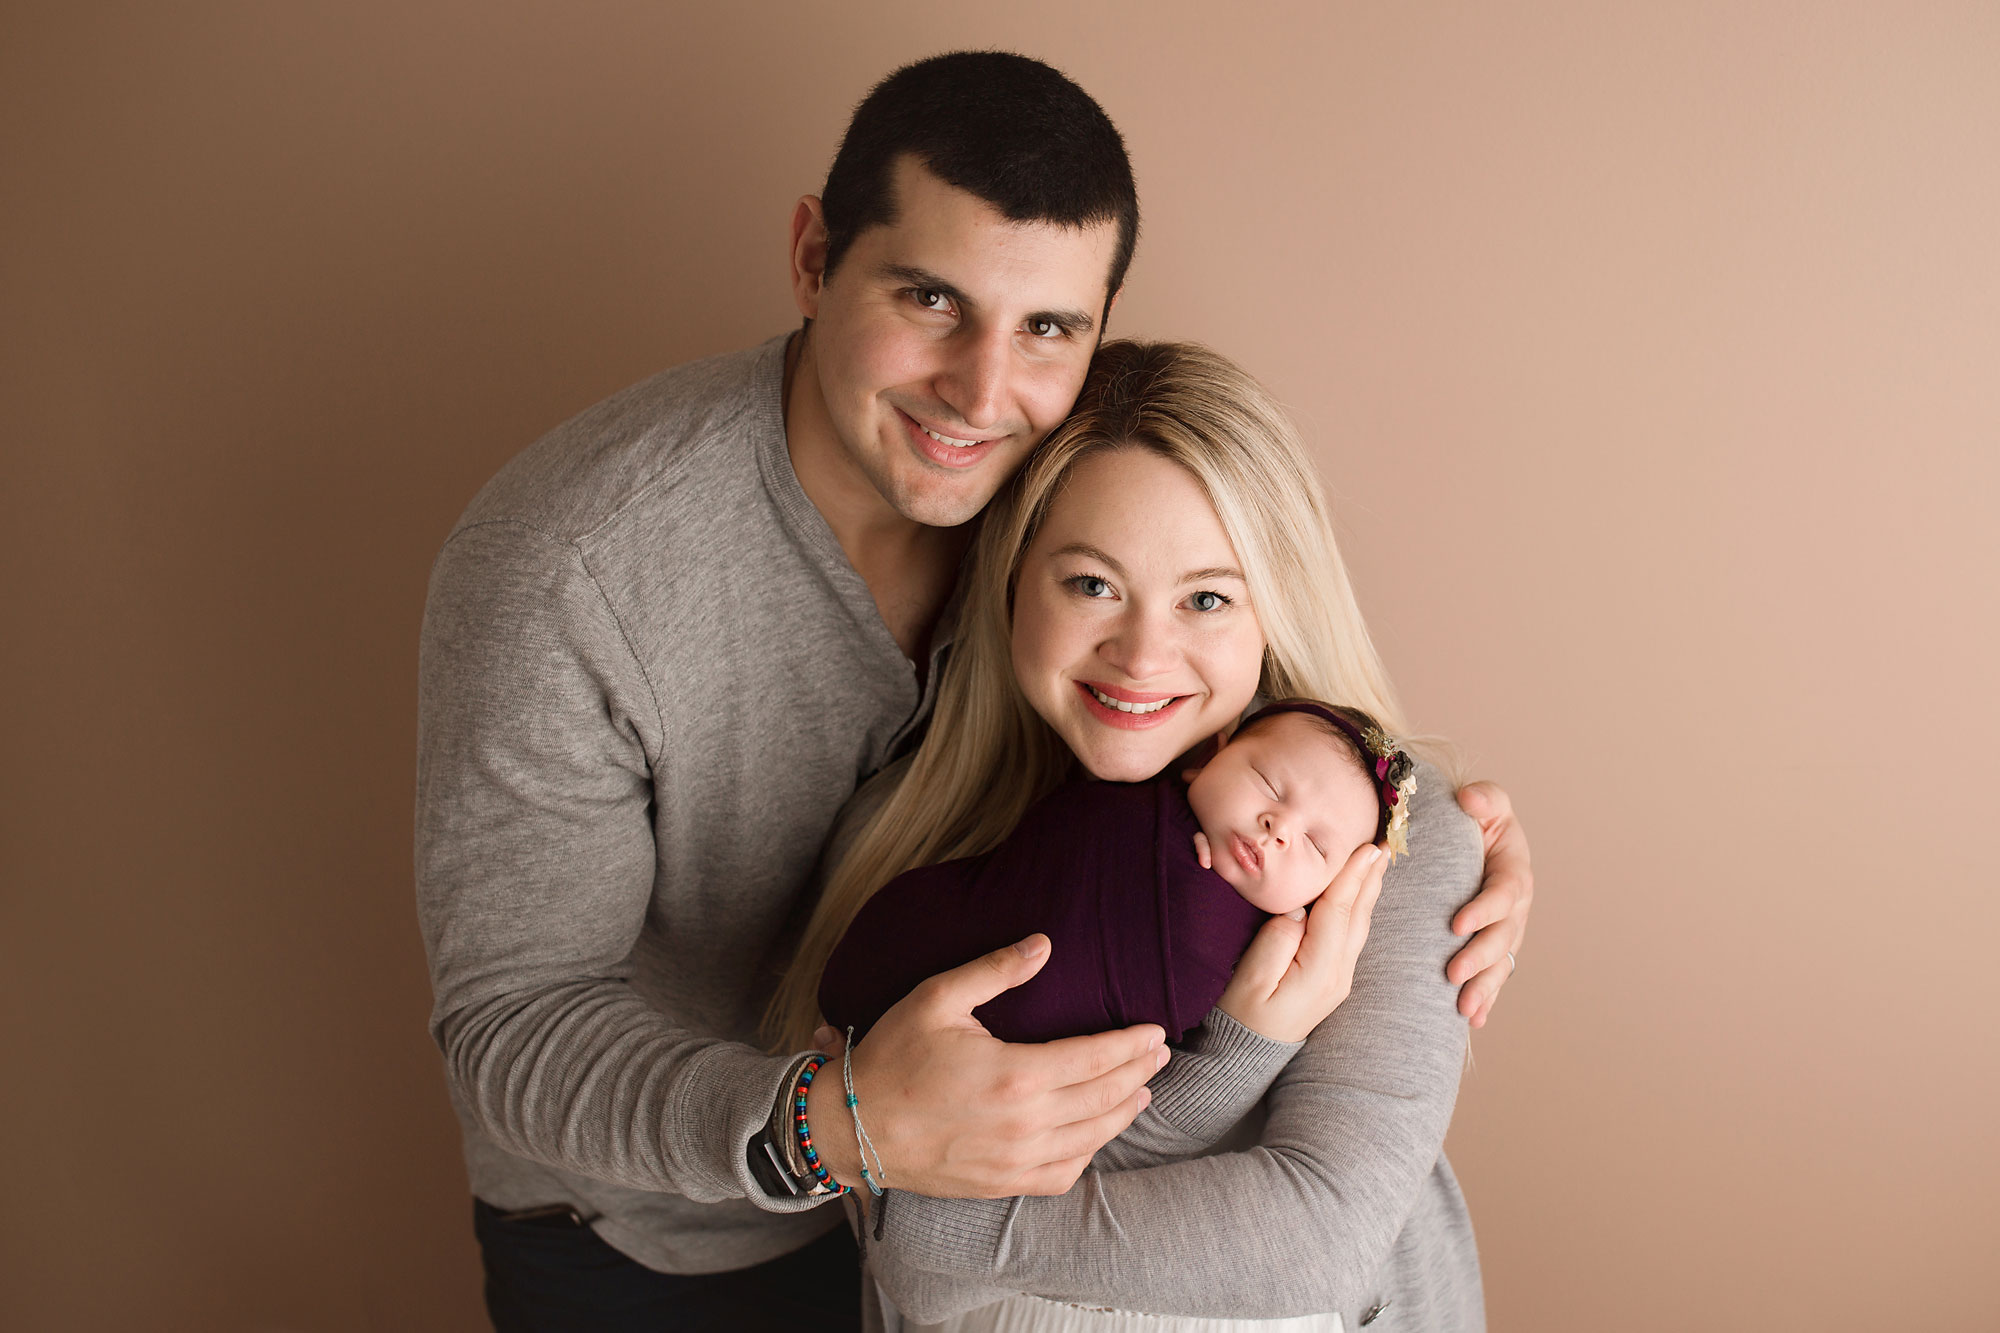 newborn and family photography in new jersey, new parents smiling and holding baby girl